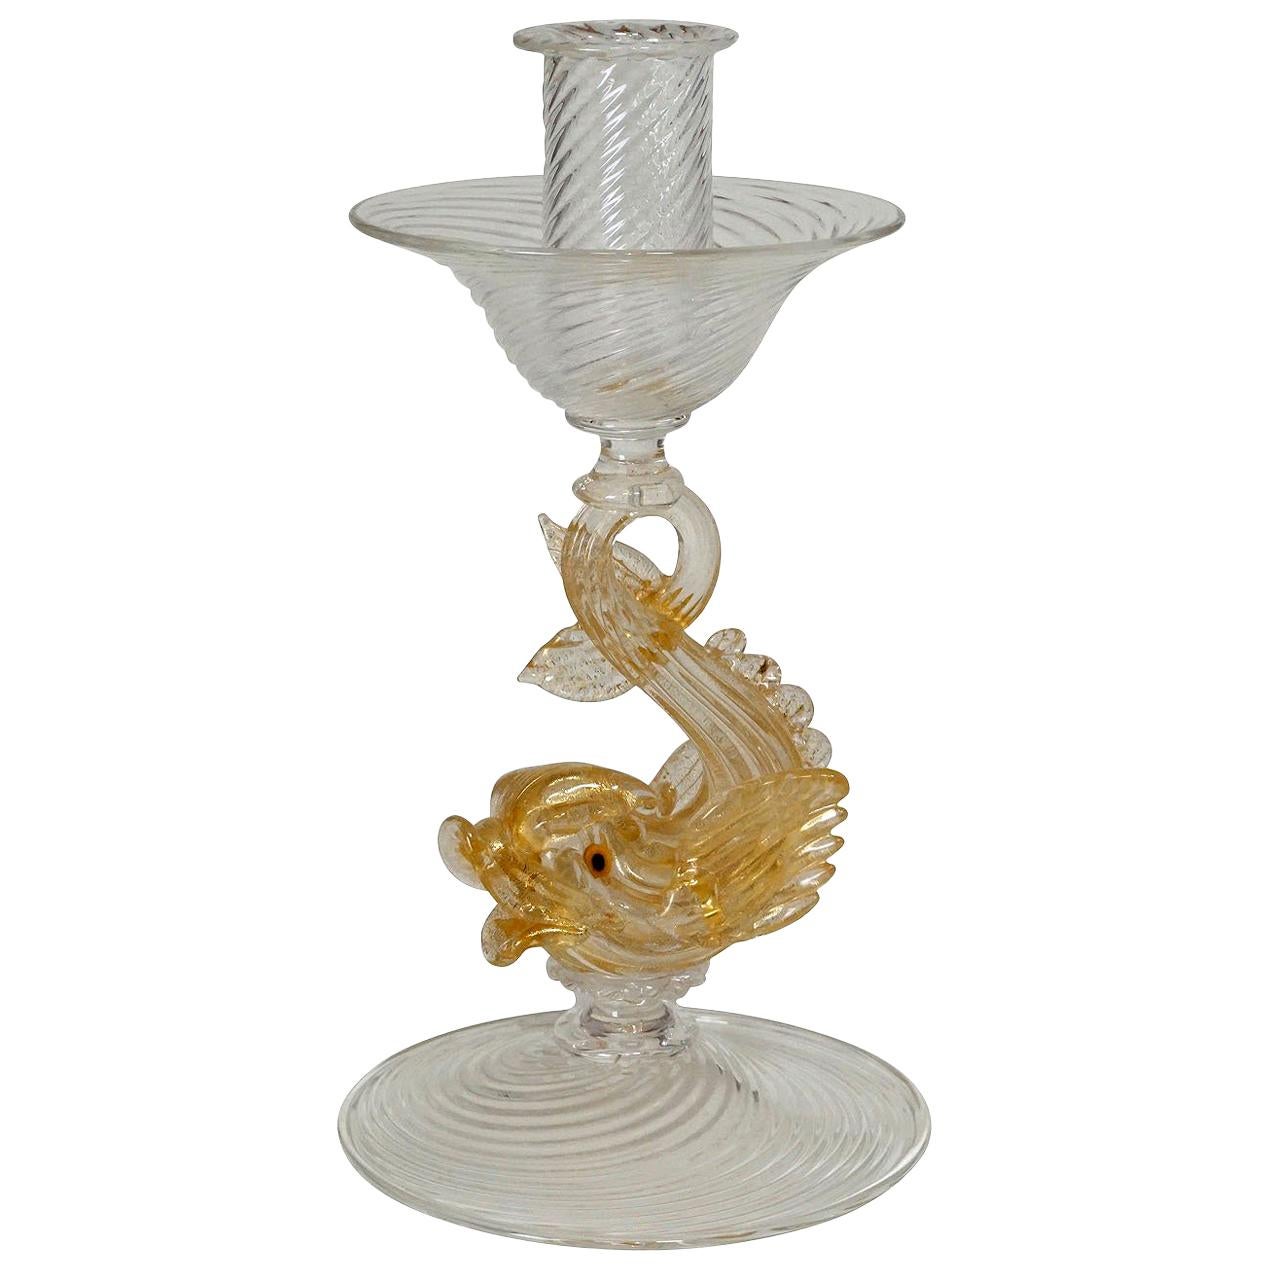 Archimede Seguso Glass Candle Stick with Dolphin, circa 1960s